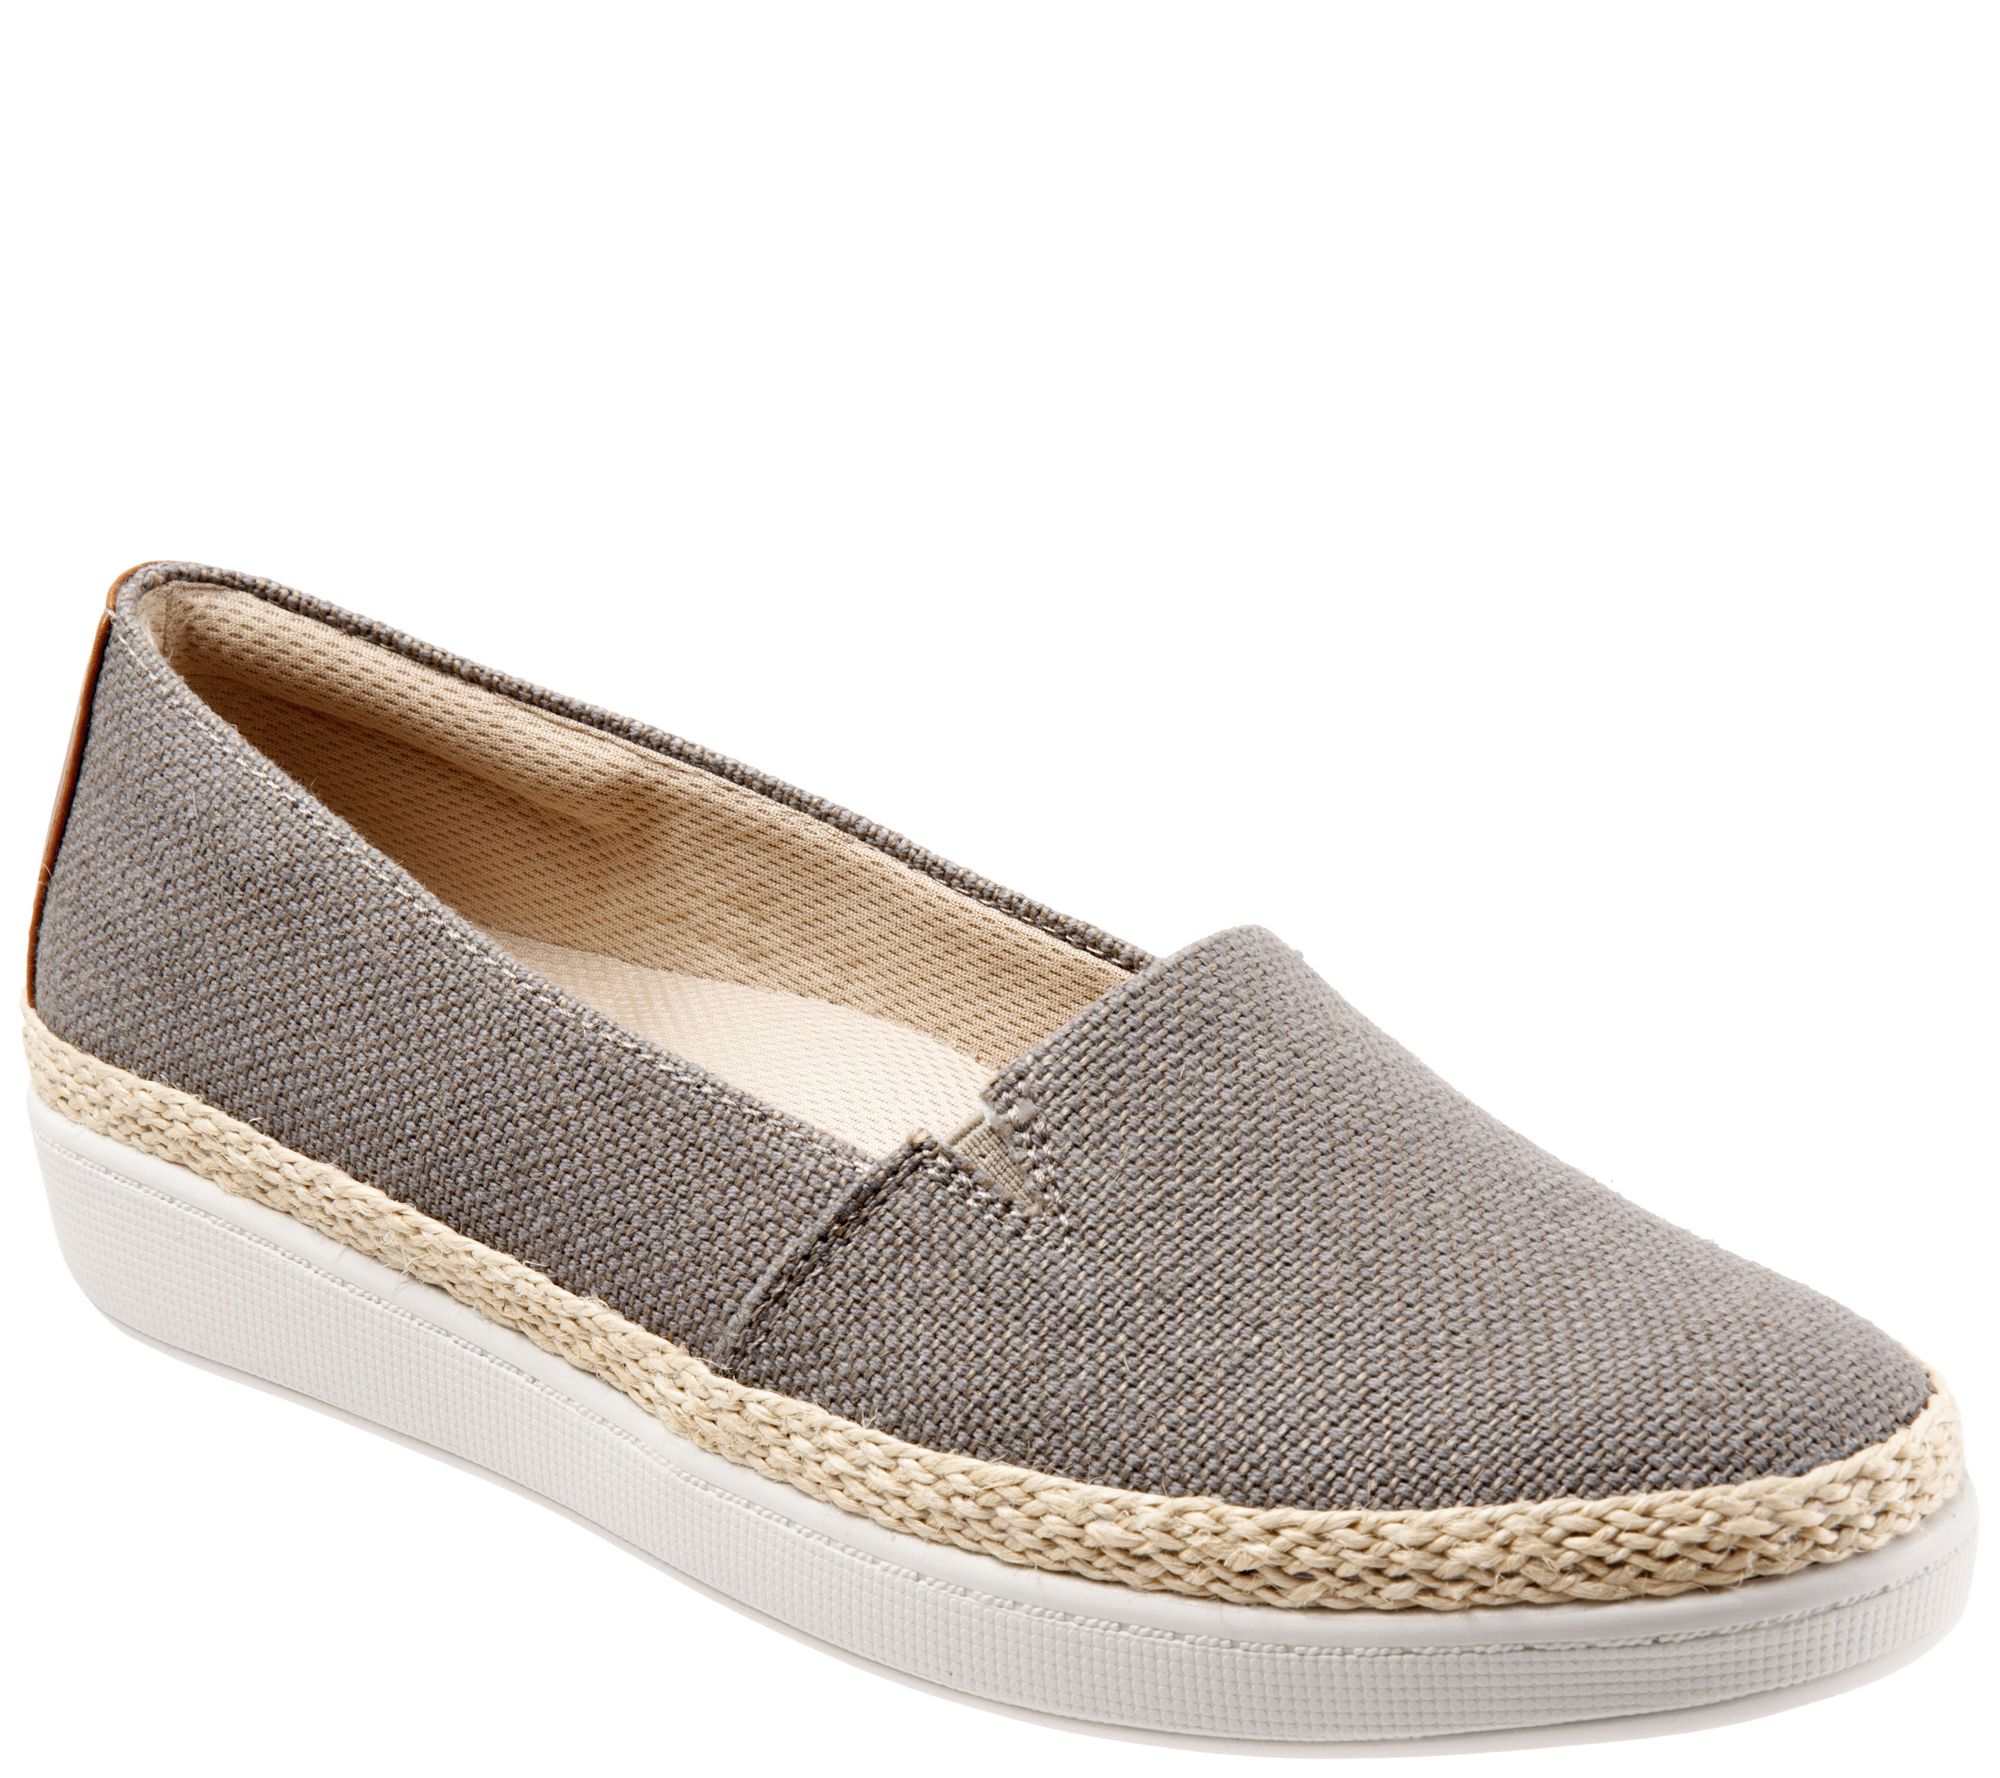 Trotters Espadrille-Style Casual Slip-Ons - Accent - QVC.com